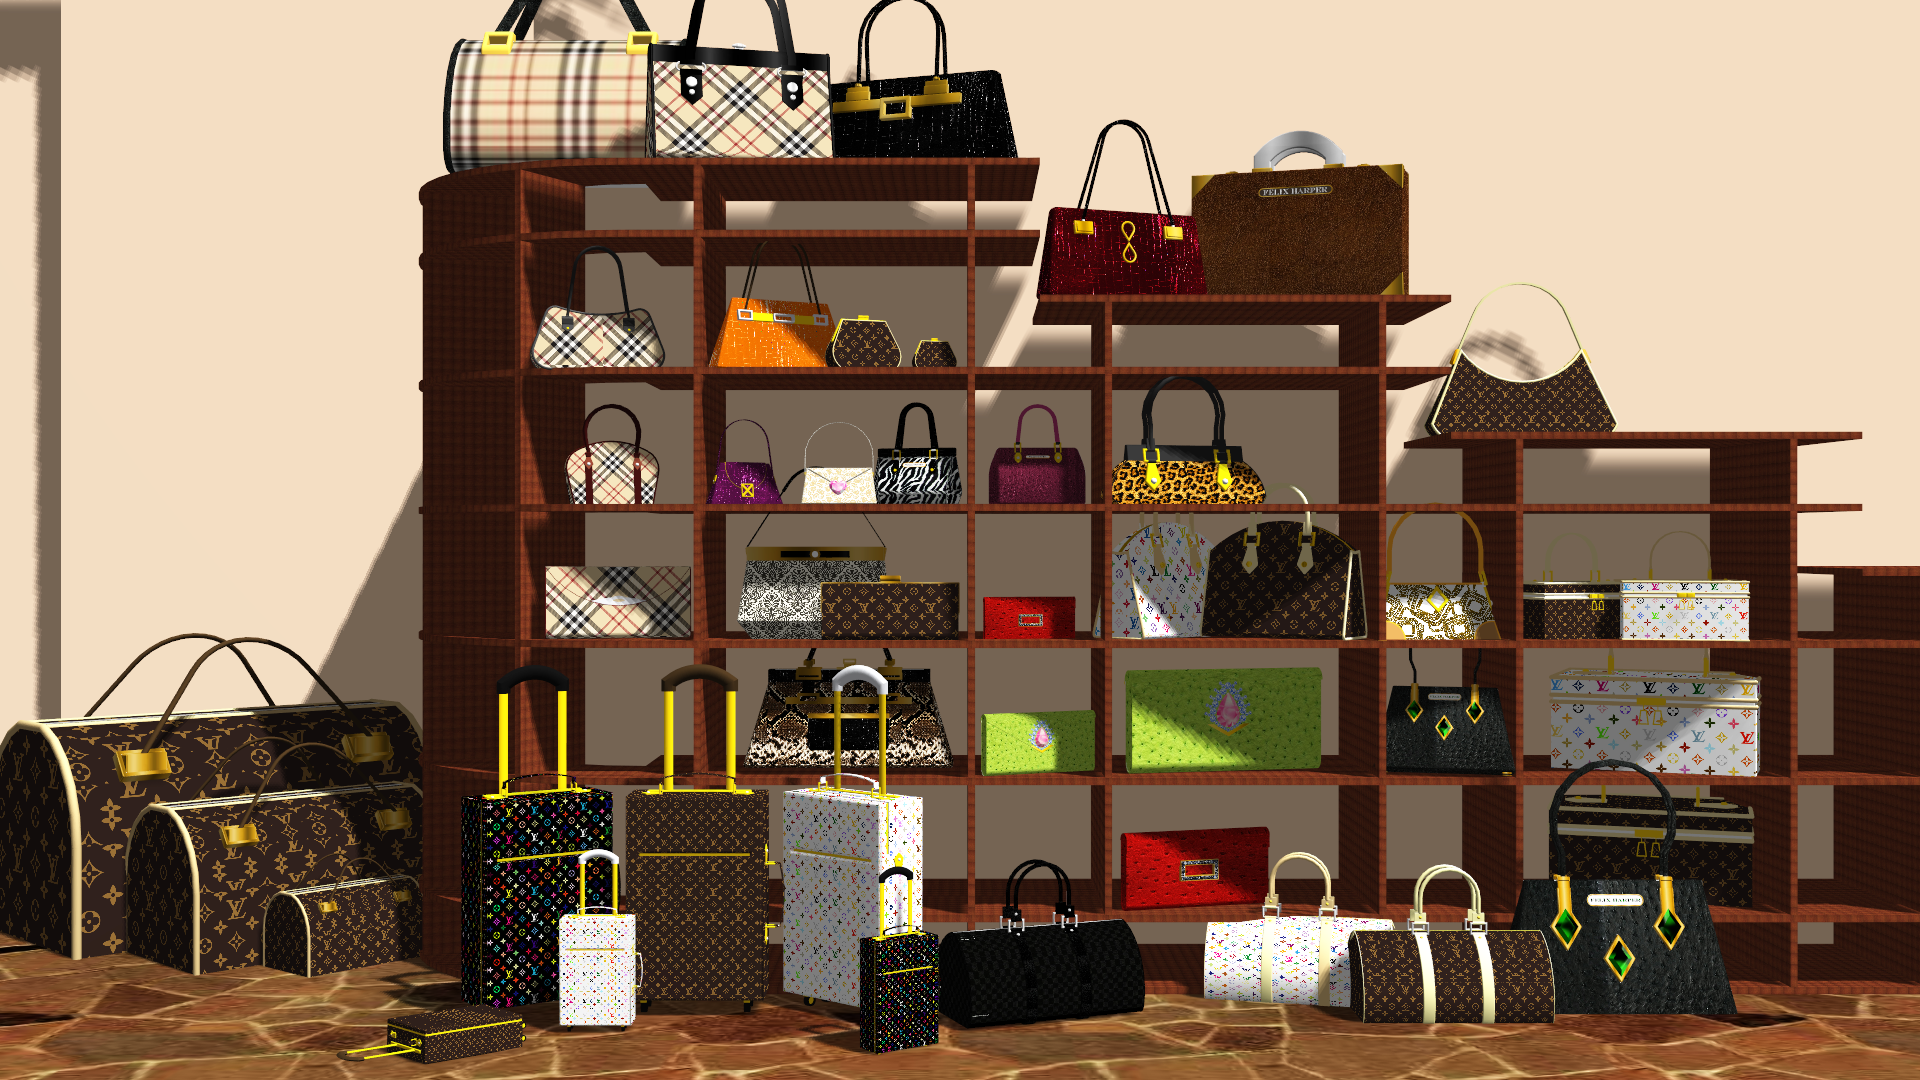 [MMD] Bags, Purses, and Suitcases Pack DL by OniMau619 on DeviantArt